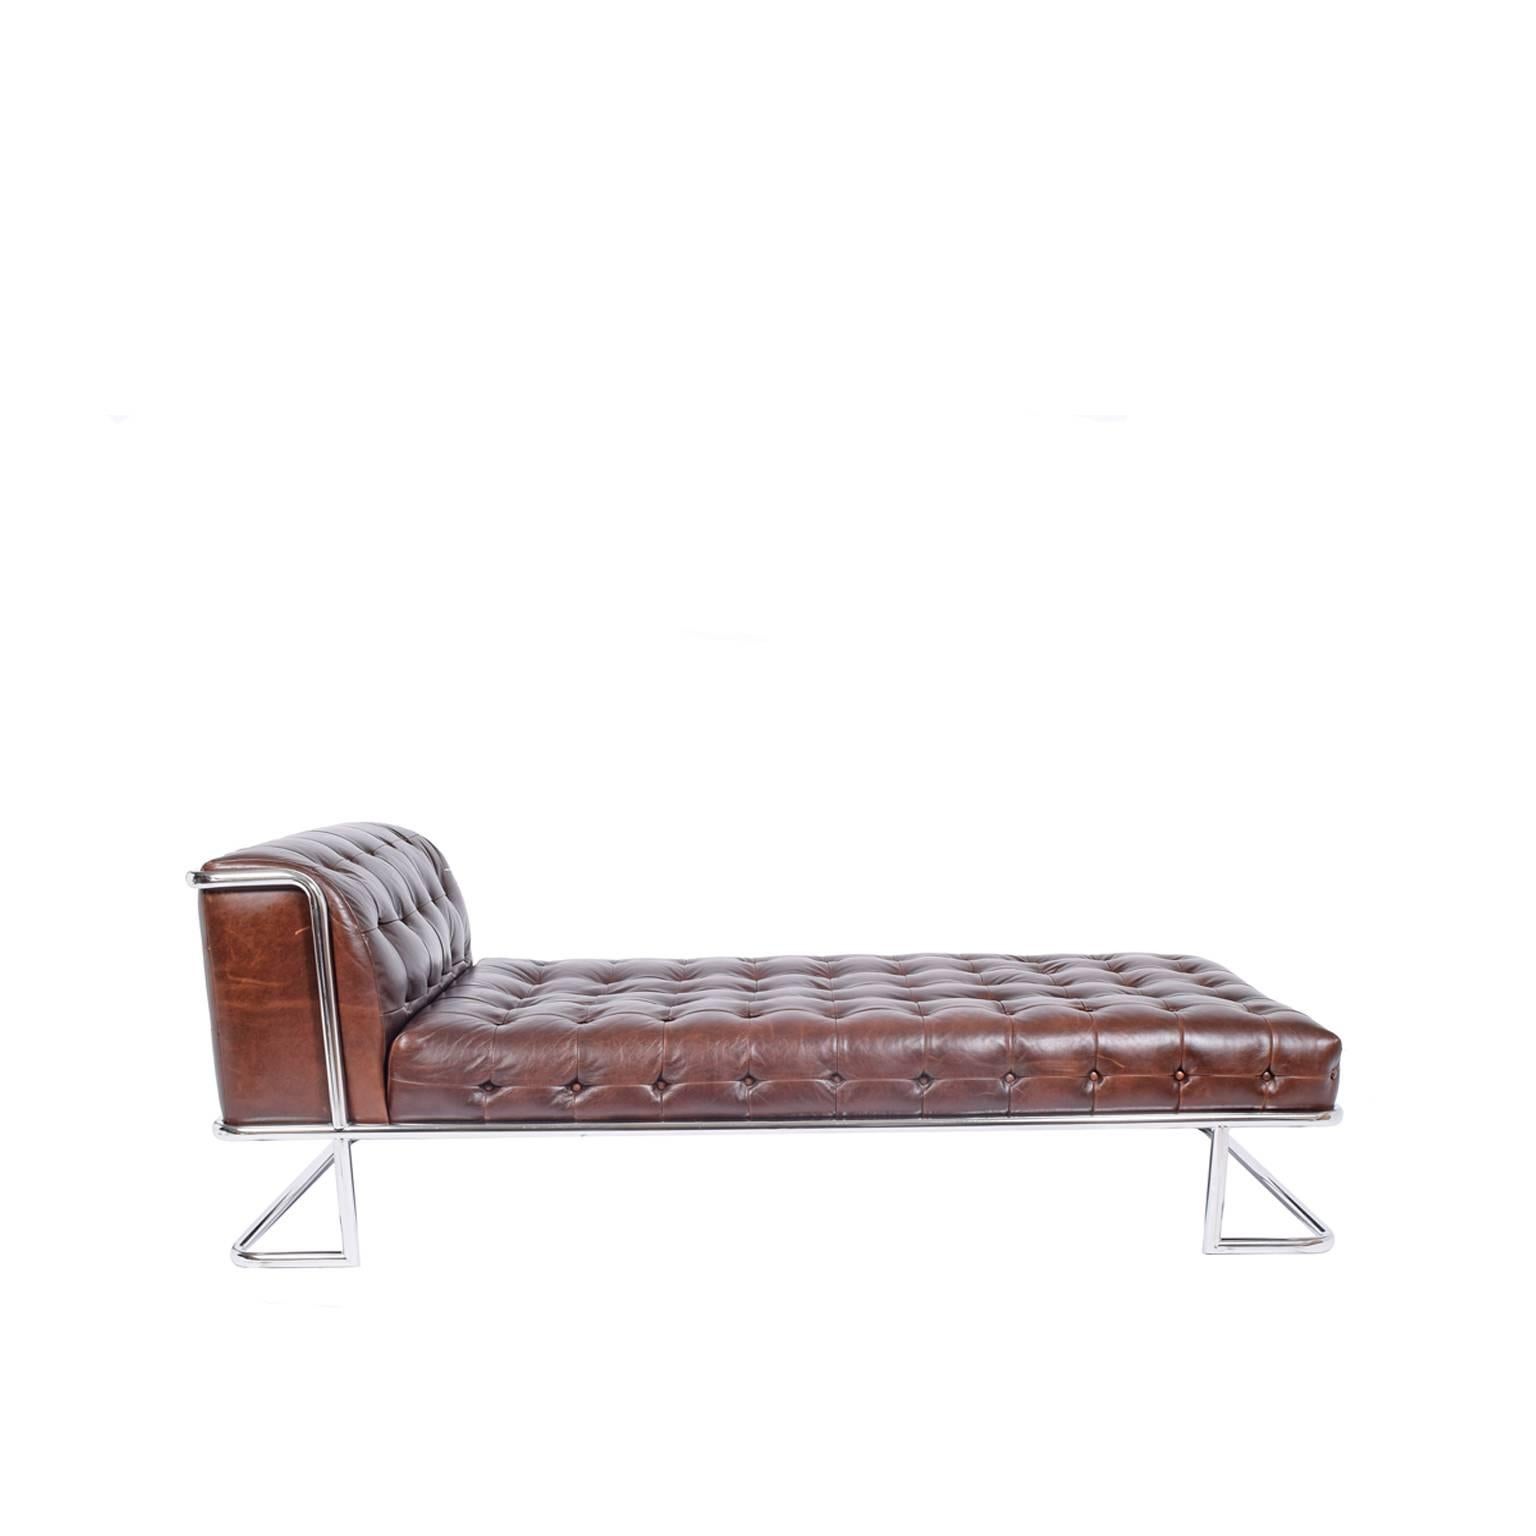 Wonderful tubular steel frame with tufted leather upholstered daybed/seating.